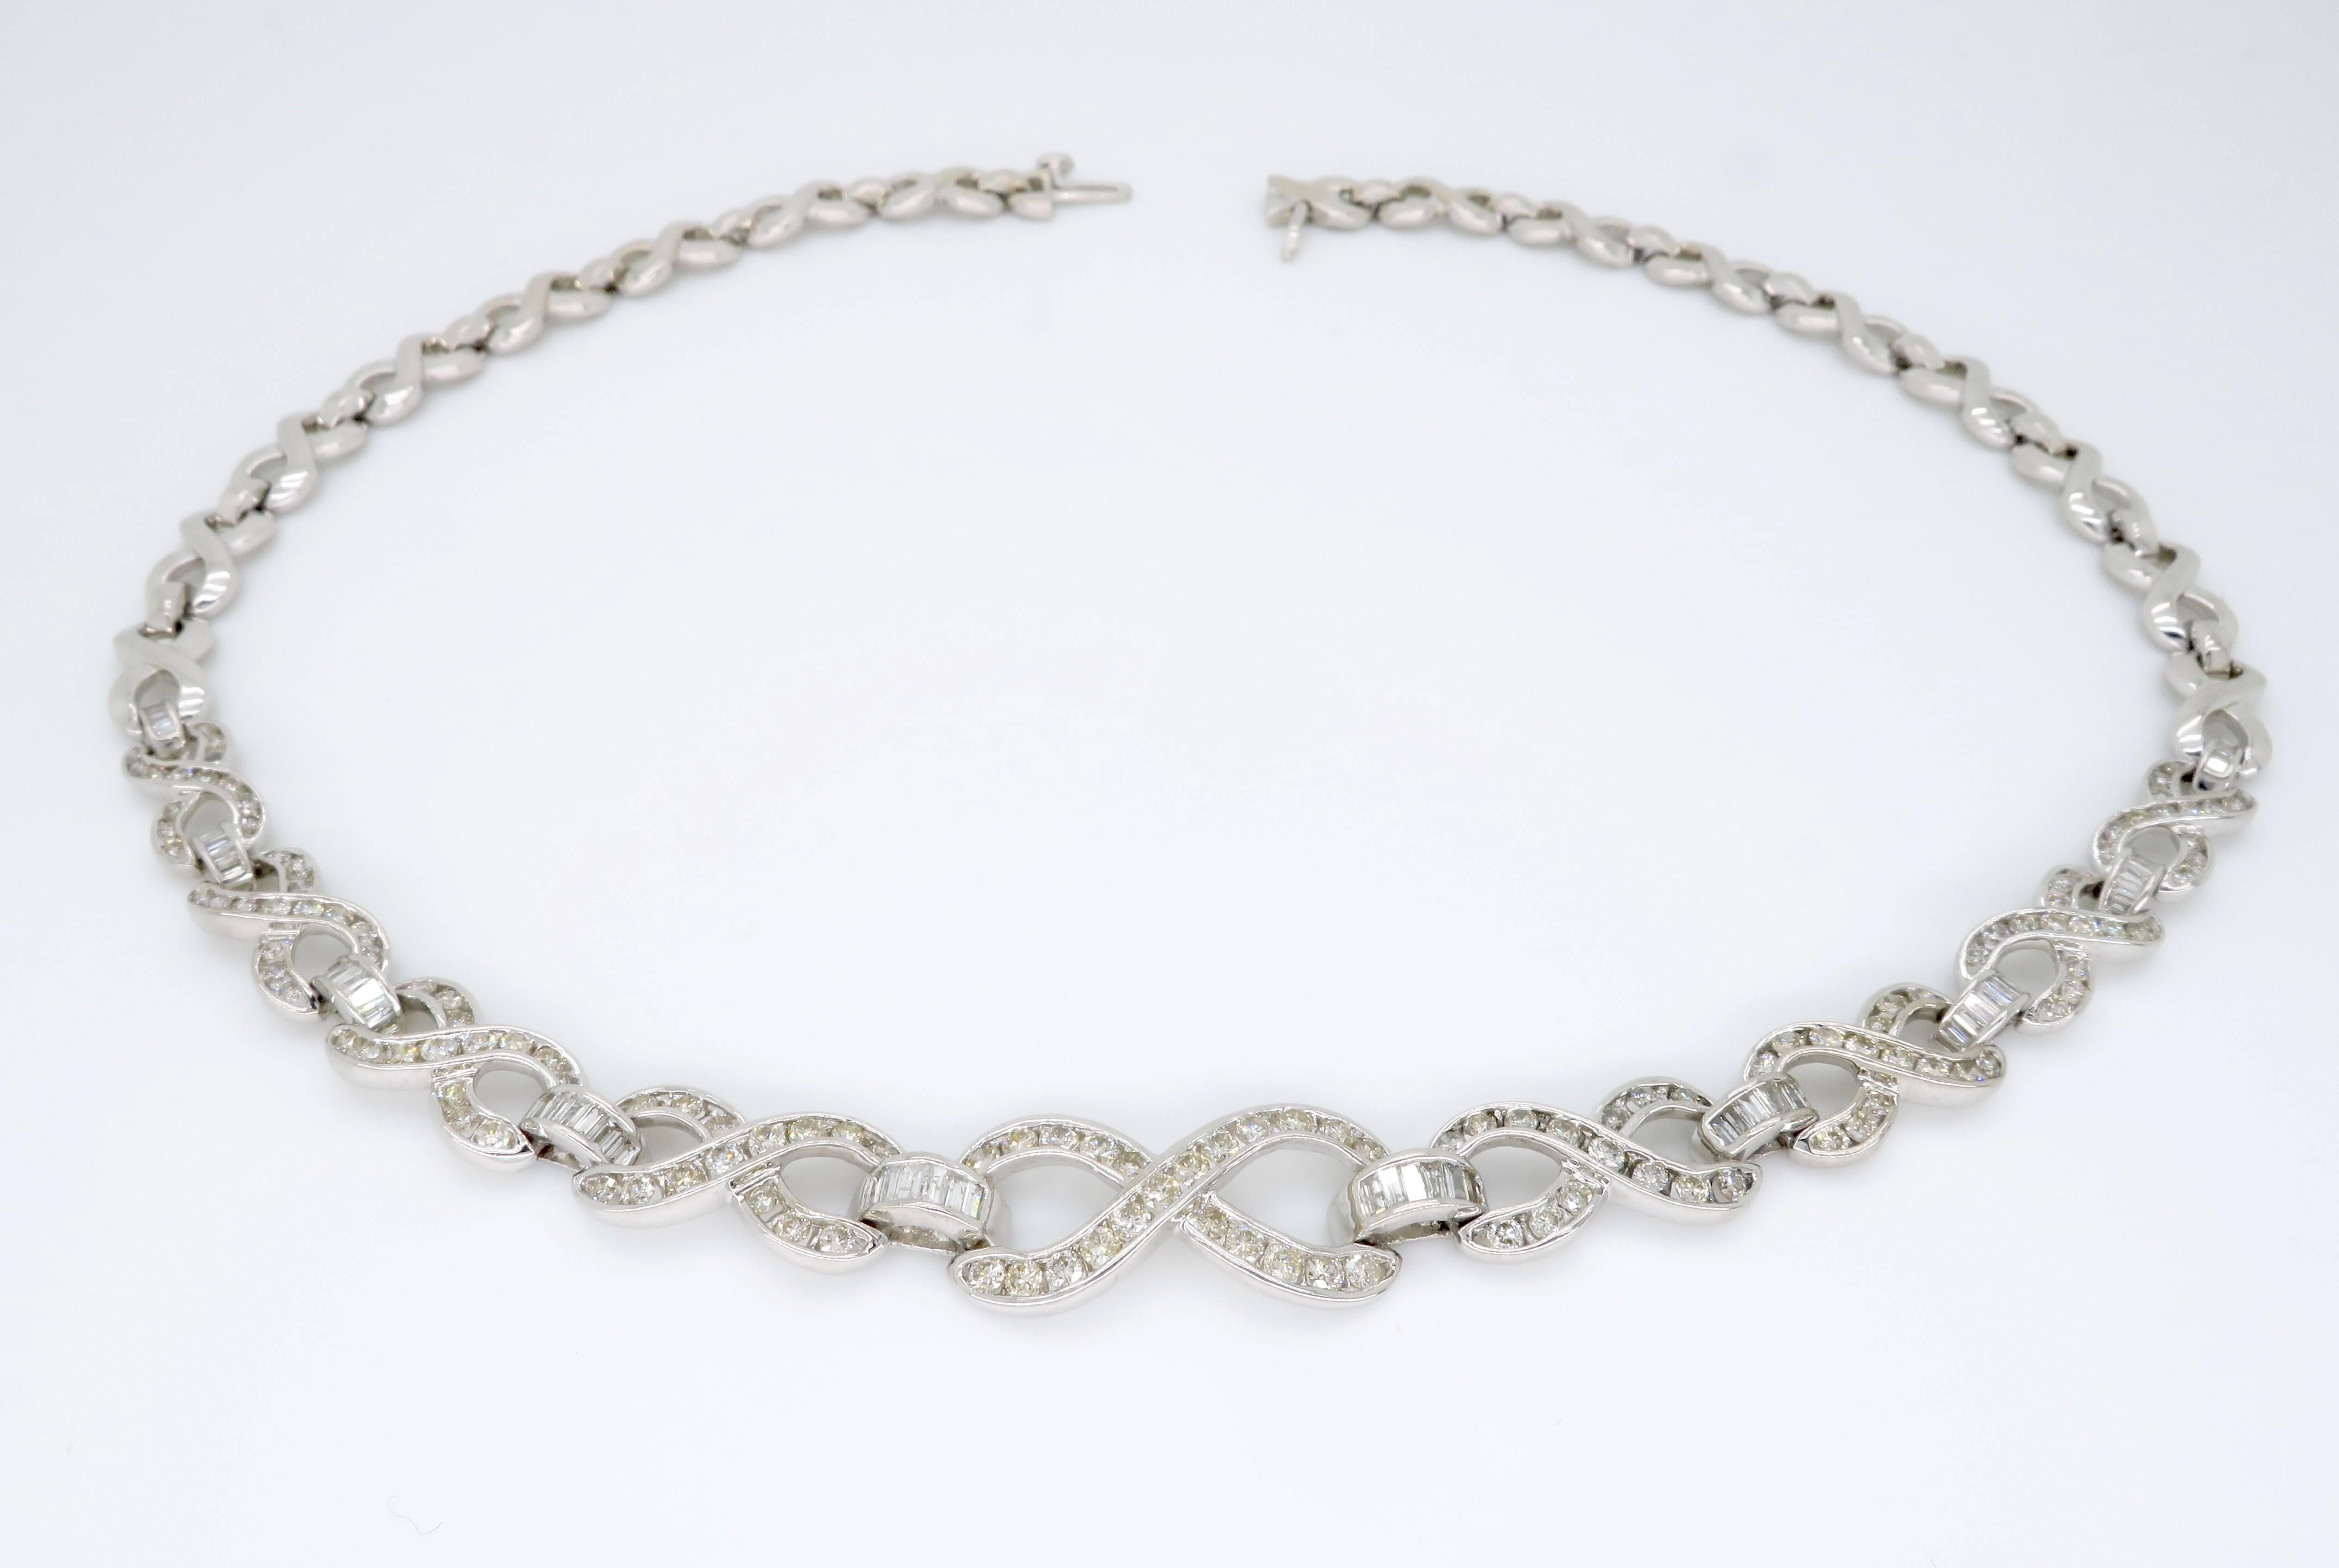 Infinity style diamond link necklace made with one hundred and ninety diamonds. 

134 Round Brilliant cut diamonds
56 Tapered Baguette cut diamonds
Approx. 4.75ctw diamond carat weight 
Average G-J color 
Average SI-I clarity 
16